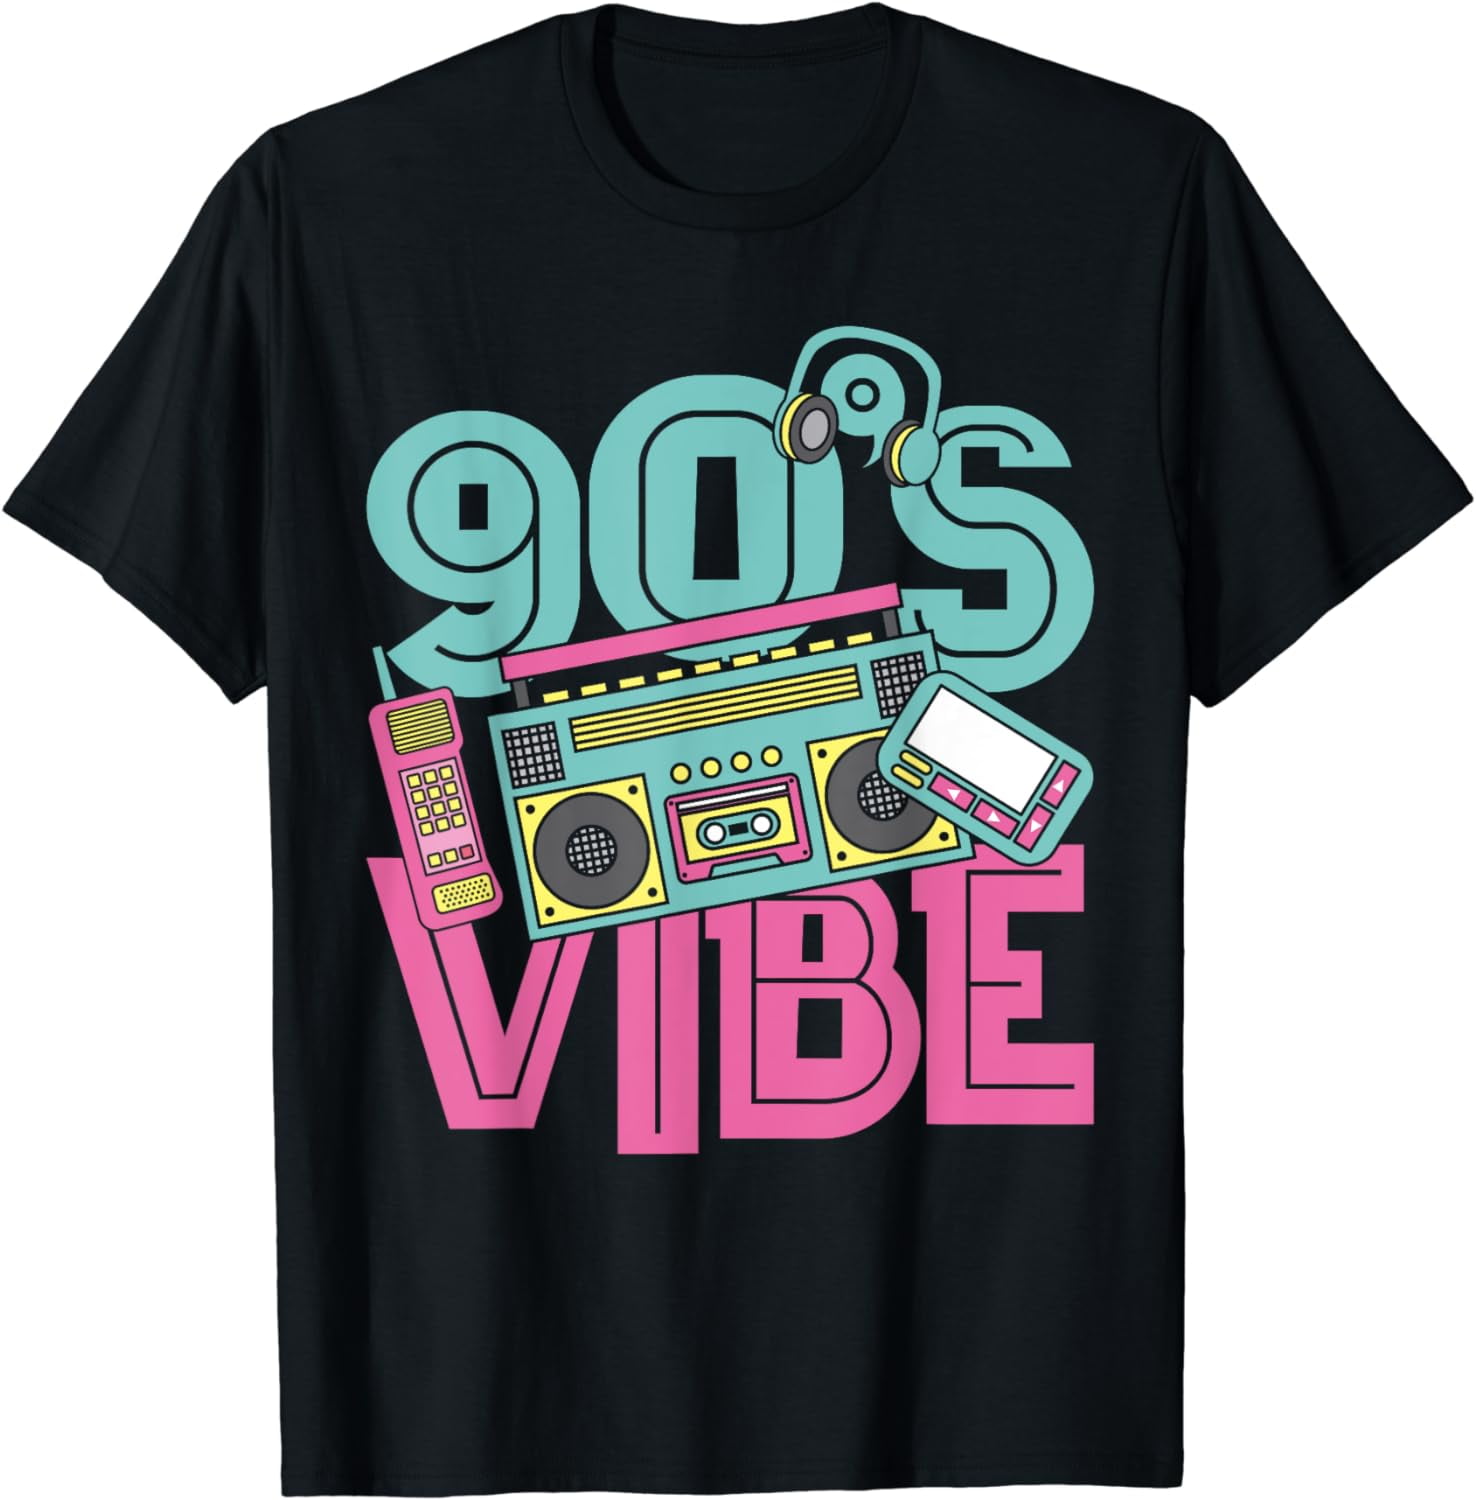 90s Vibe Vintage 1990s Music 90s Costume Party Nineties T-Shirt ...